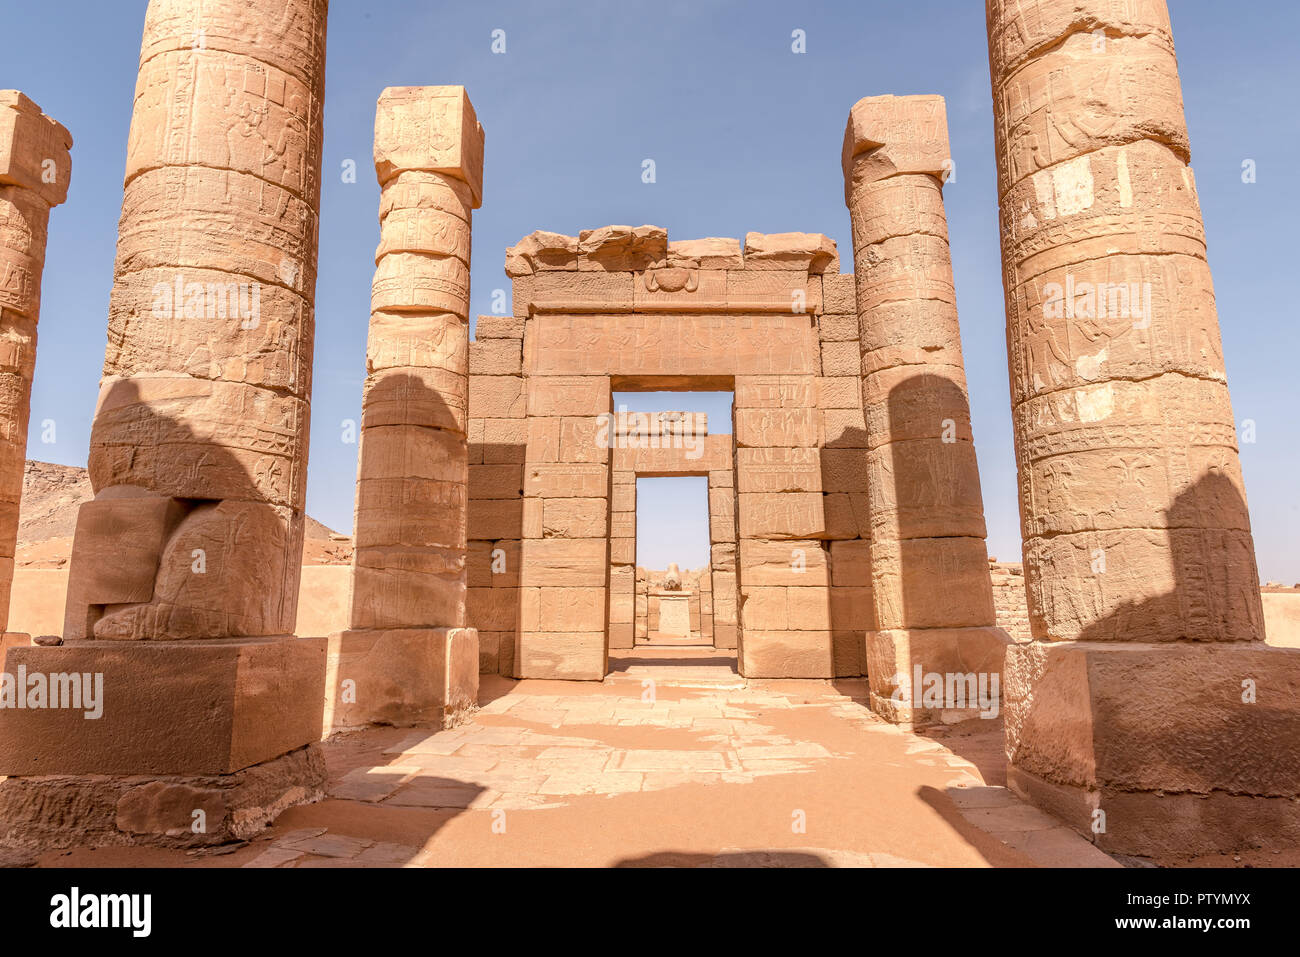 Naga temples Sudan. South of the ancient city of Meroe, stone rams guard the entrance to the Amun Temple in Naga, near a large bend in the Nile River Stock Photo